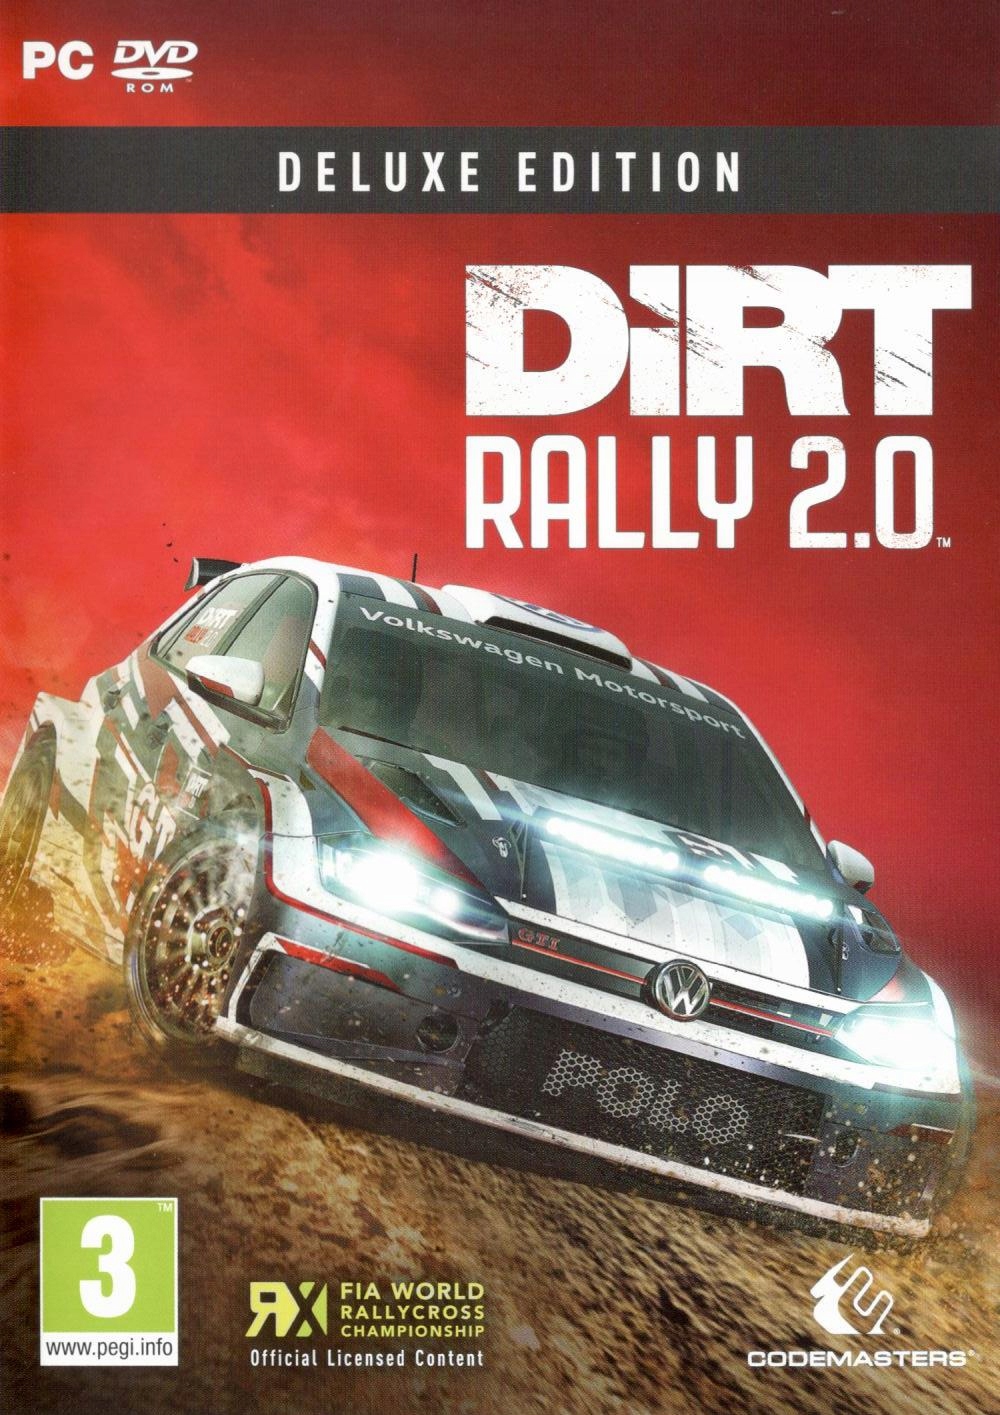 DiRT Rally 2.0 Deluxe Edition BOX